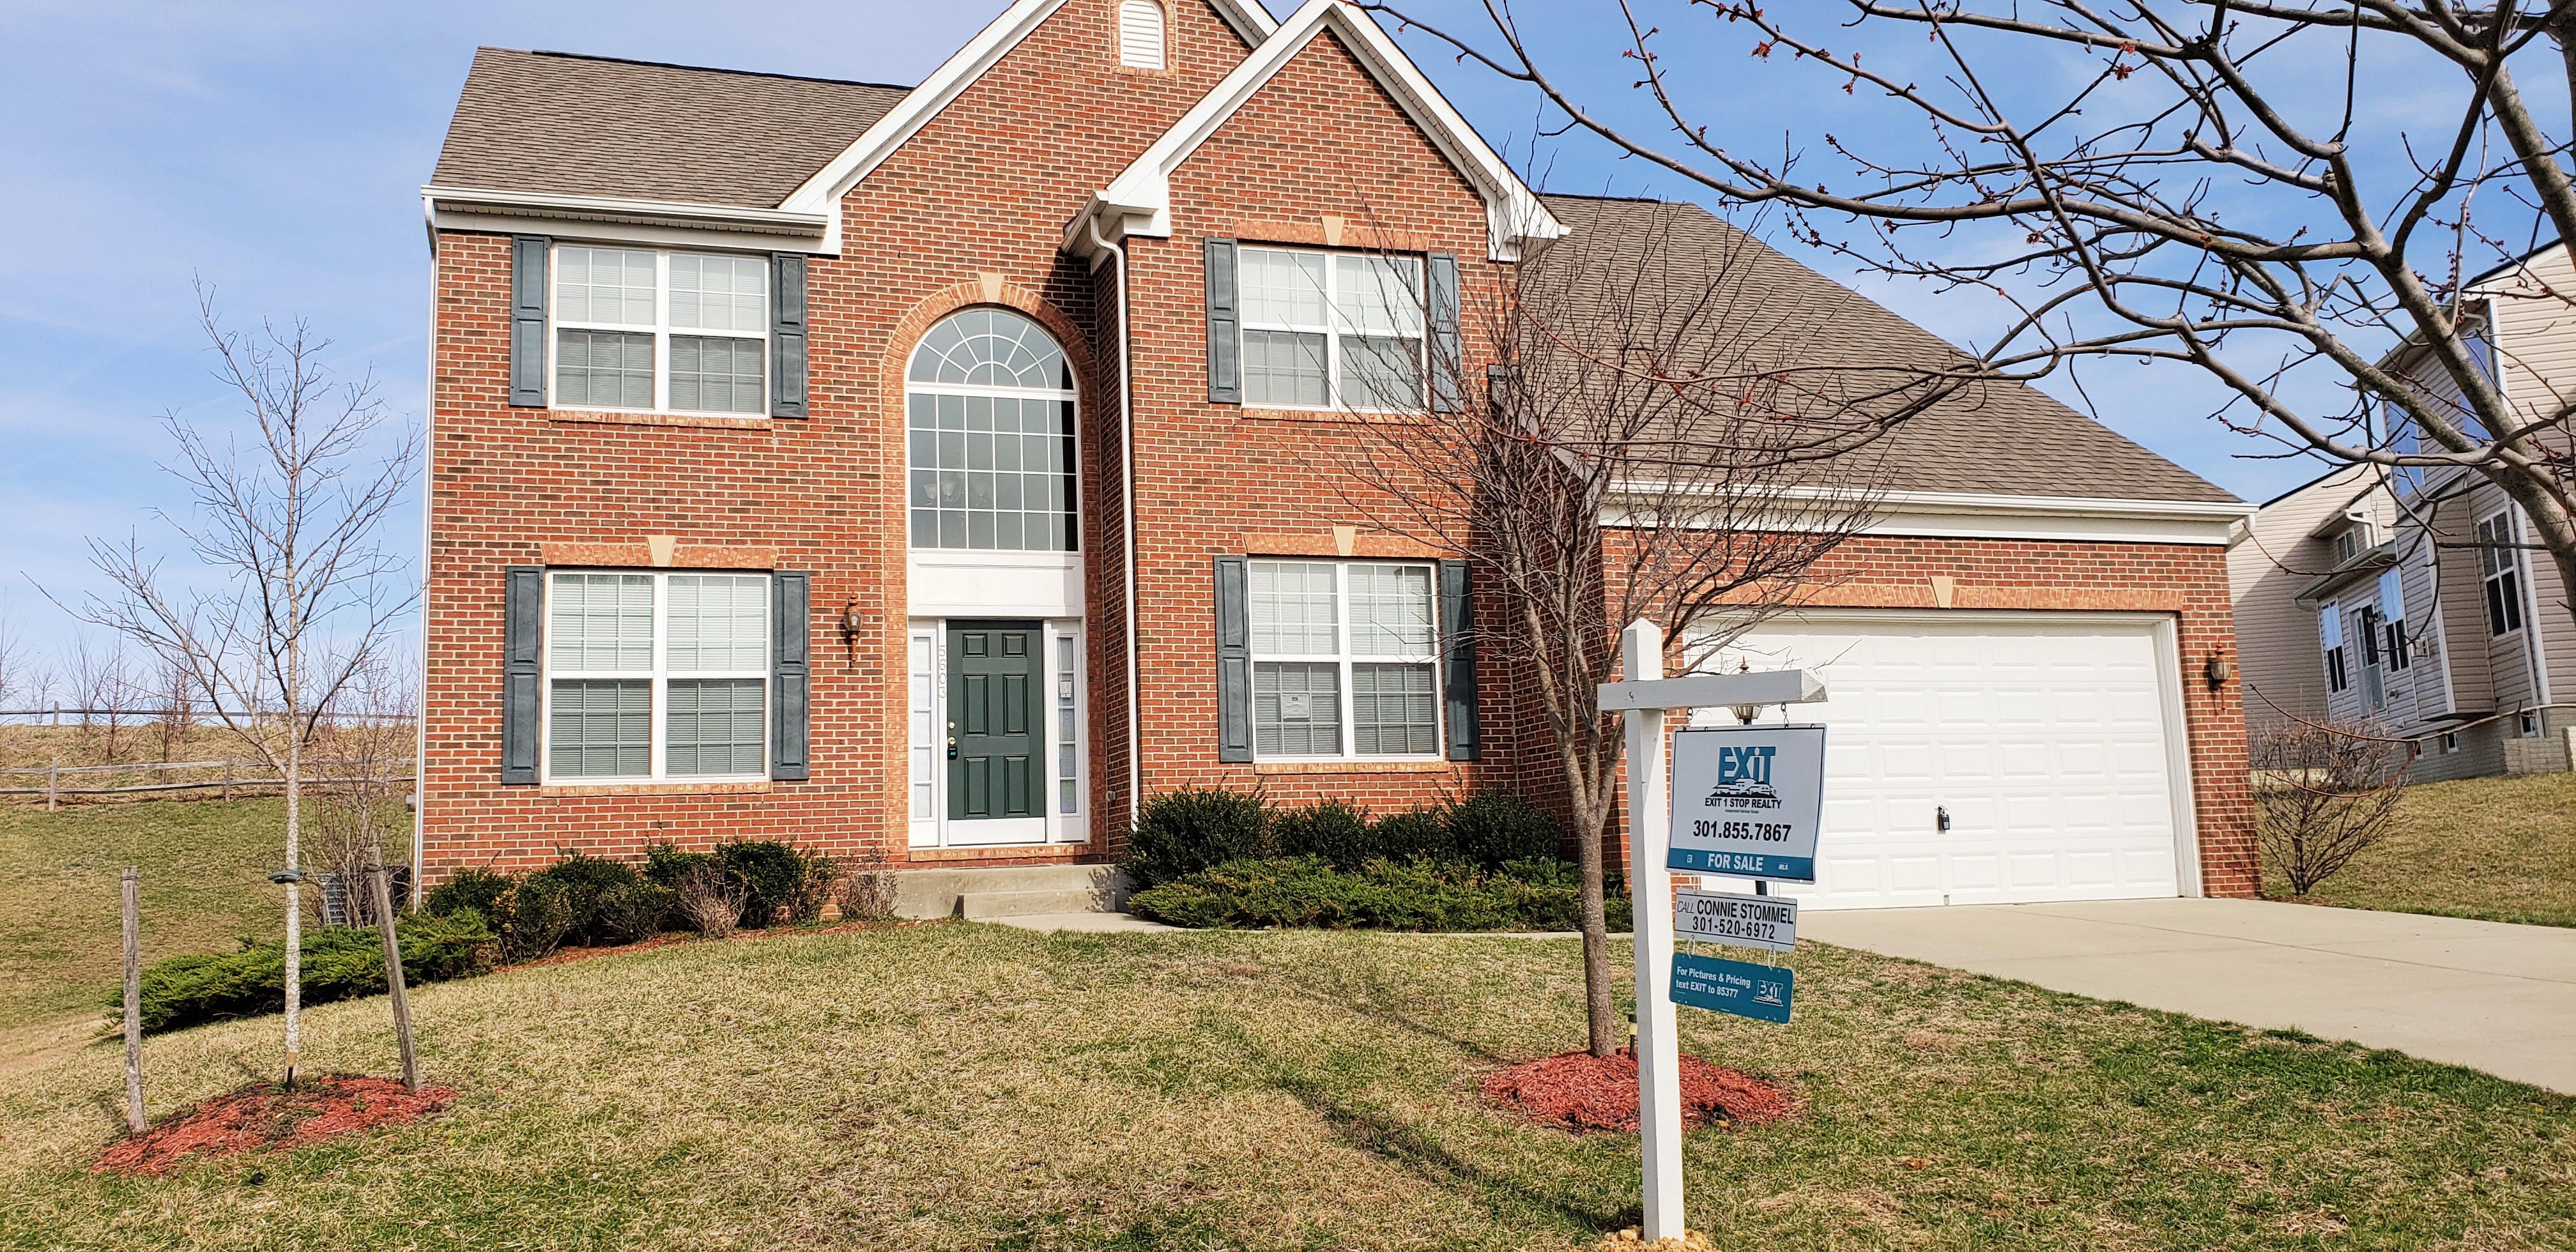 Home for Sale in Upper Marlboro MD